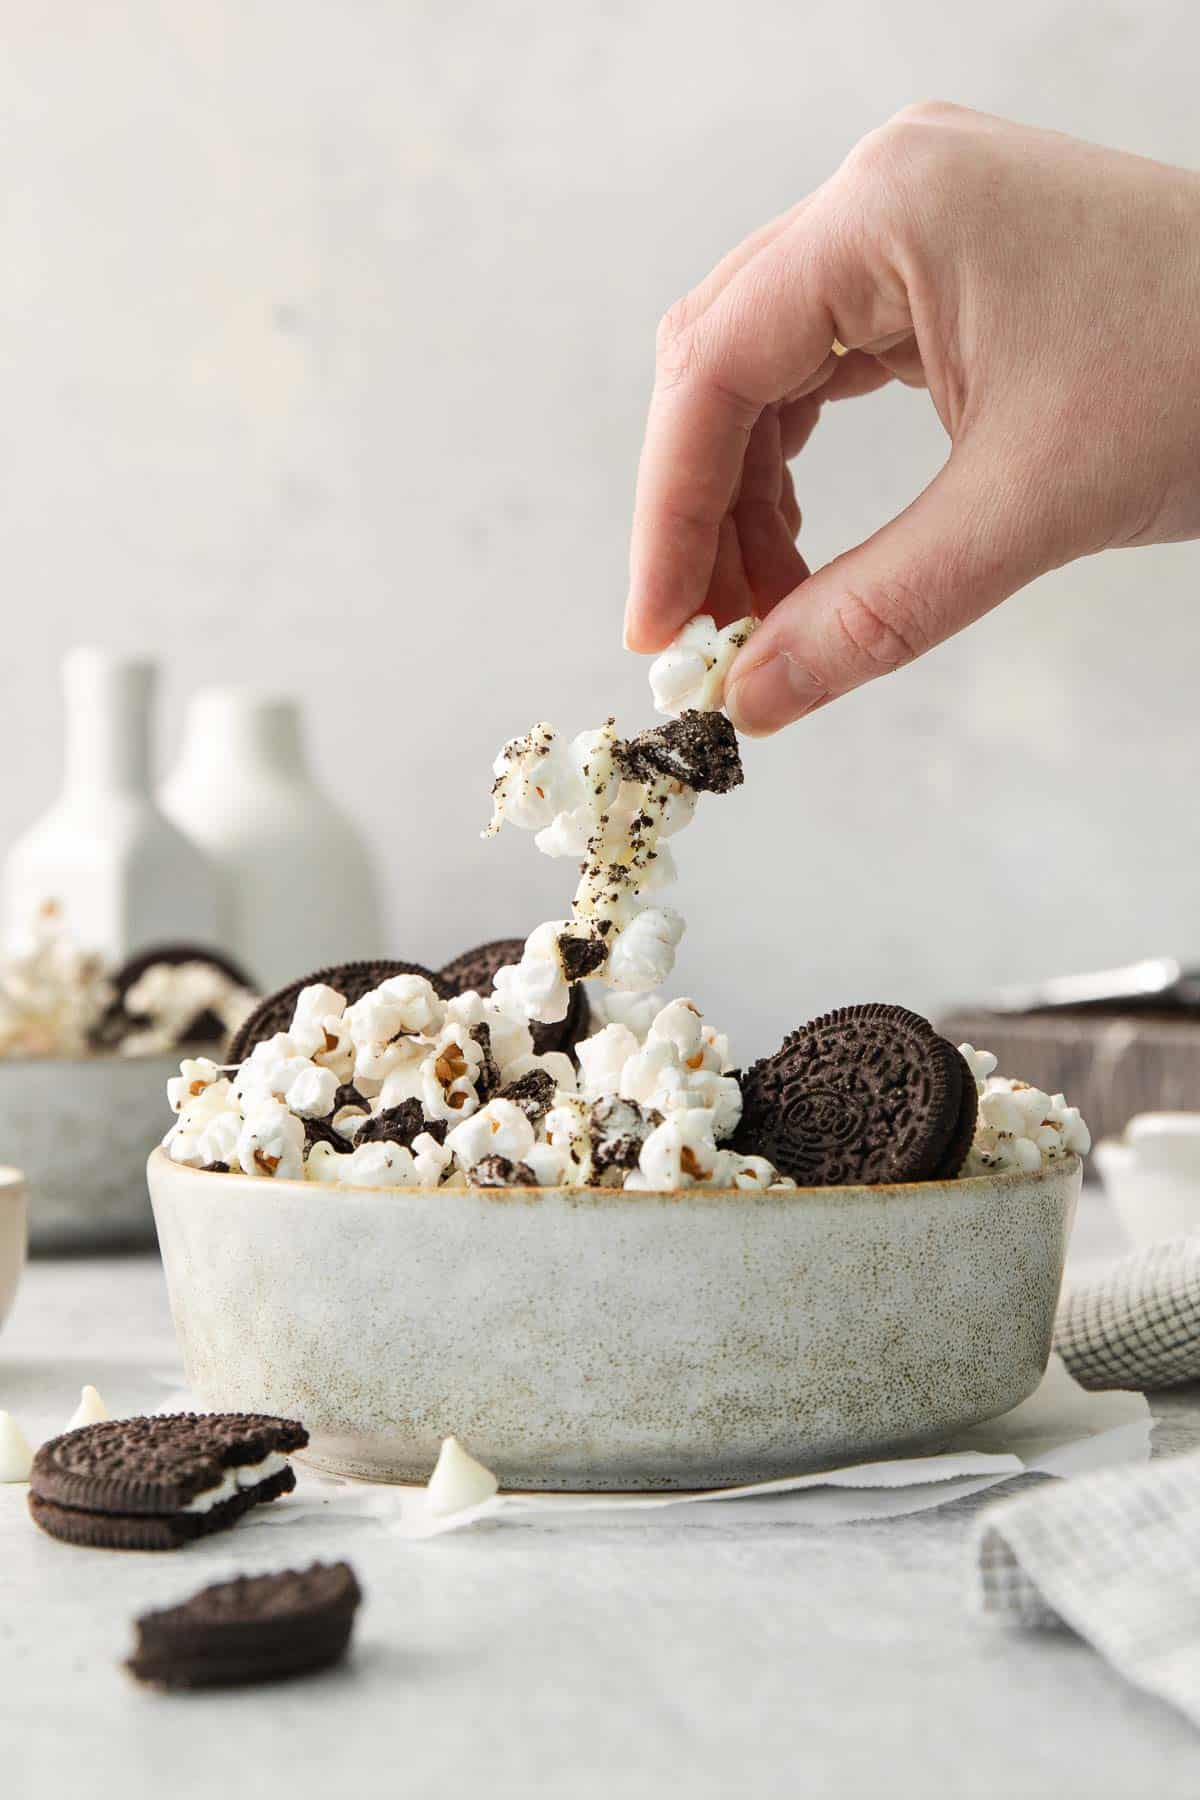 Oreo popcorn in a bowl with a hand picking up a piece